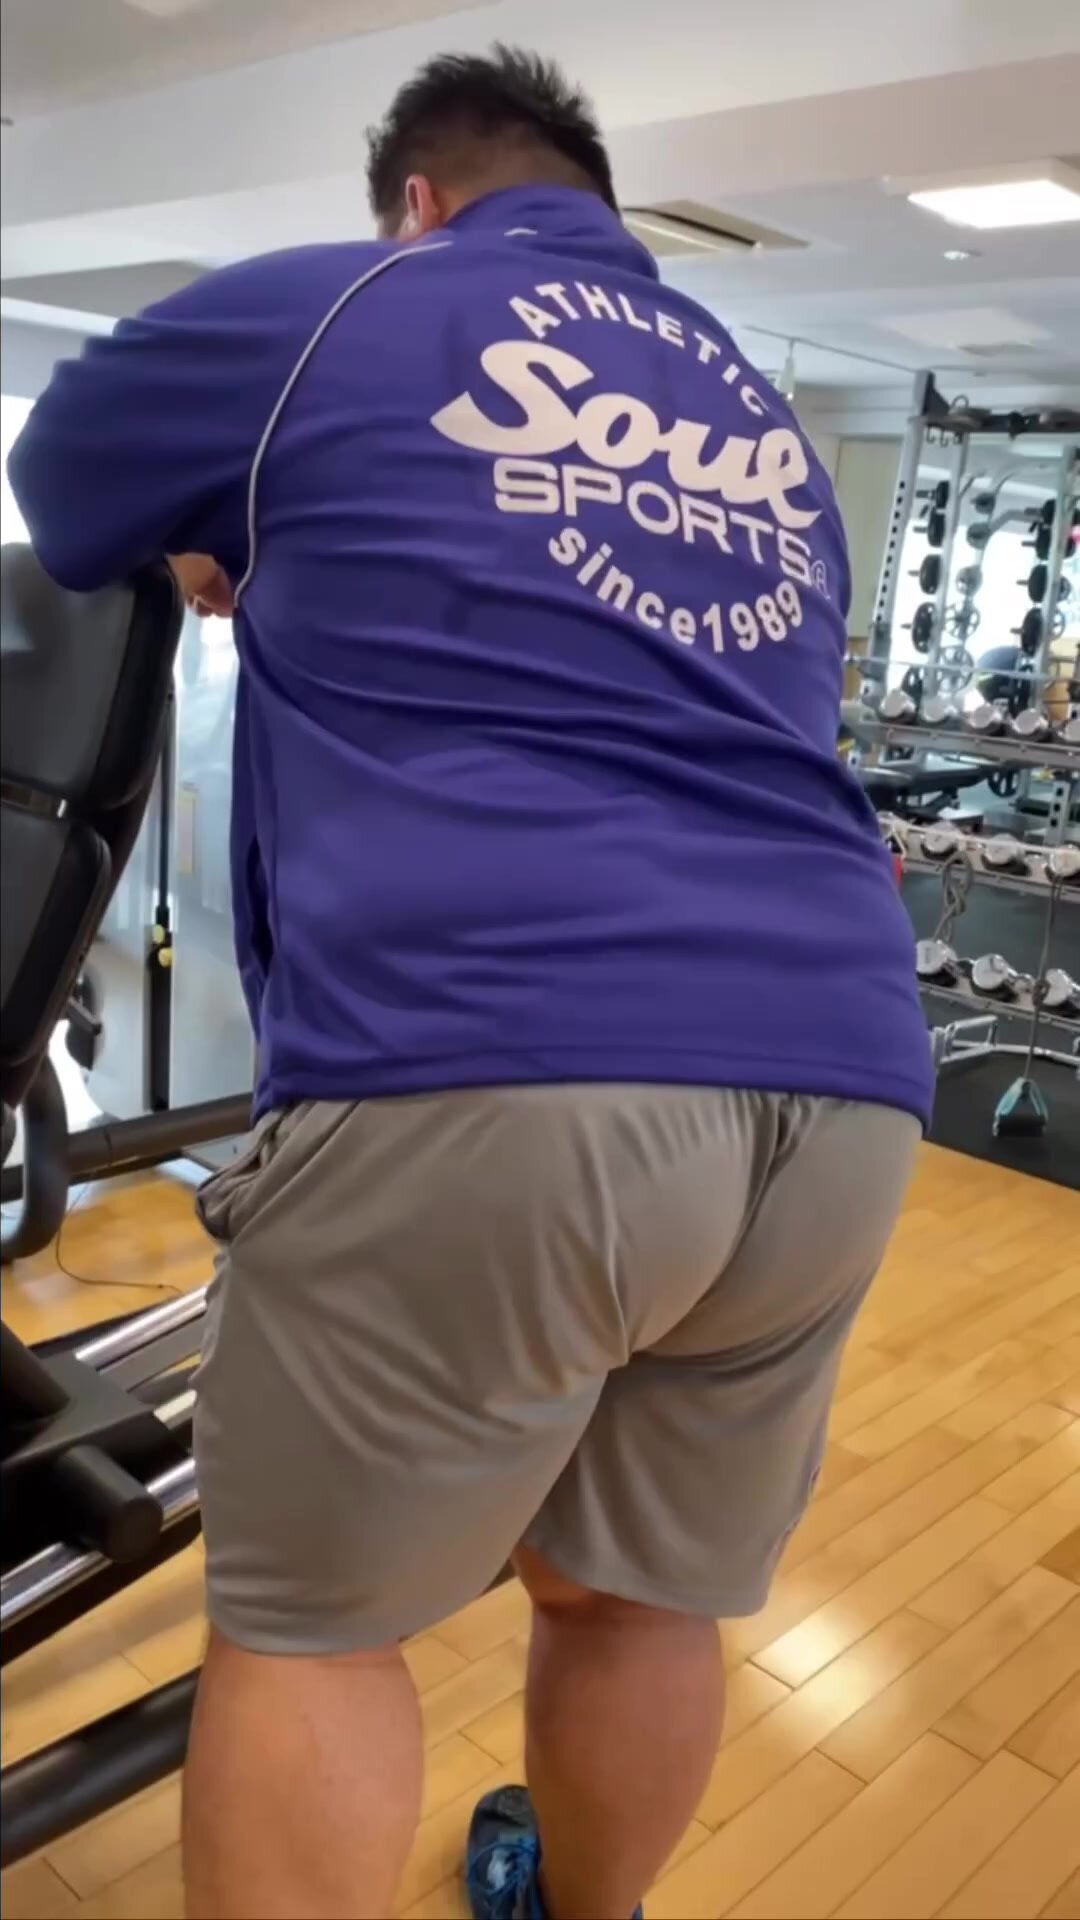 This Japanese with his big ass is driving me crazy